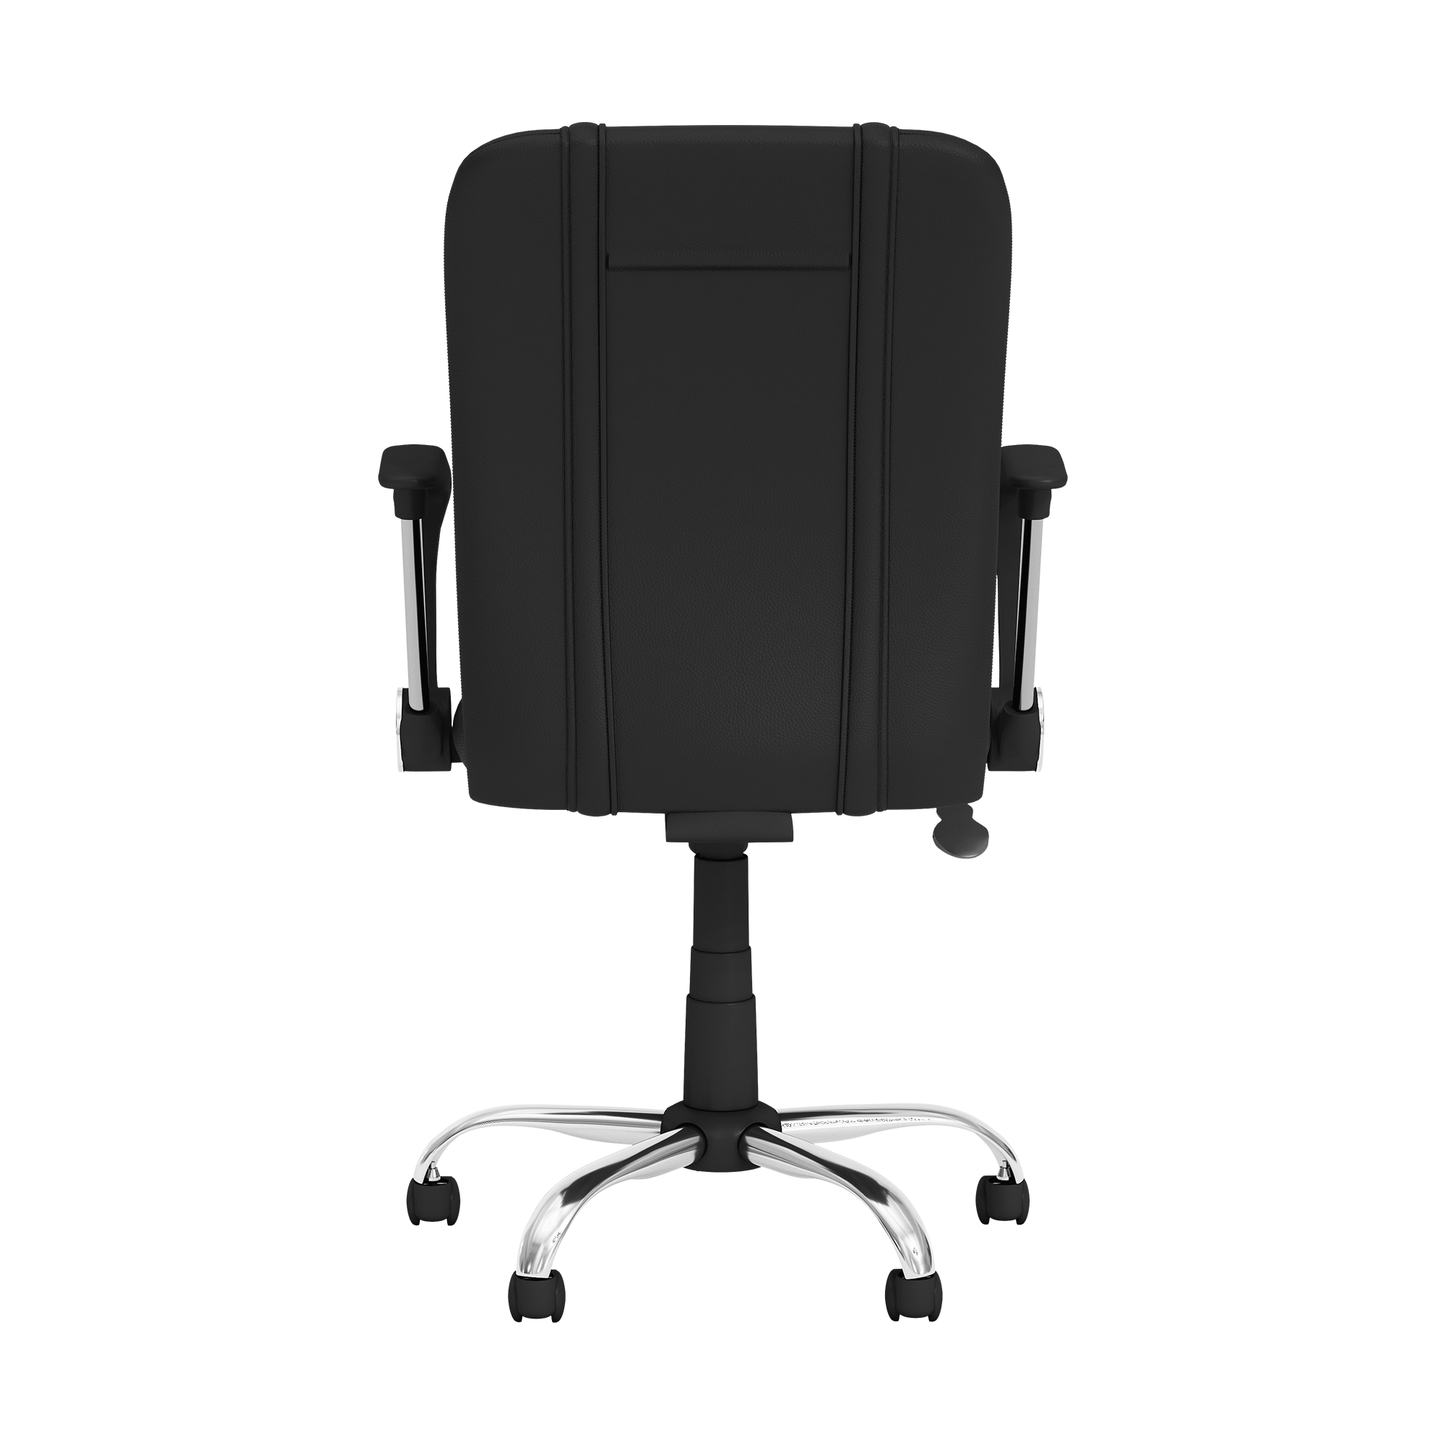 Curve Task Chair with Tampa Bay Rays Secondary